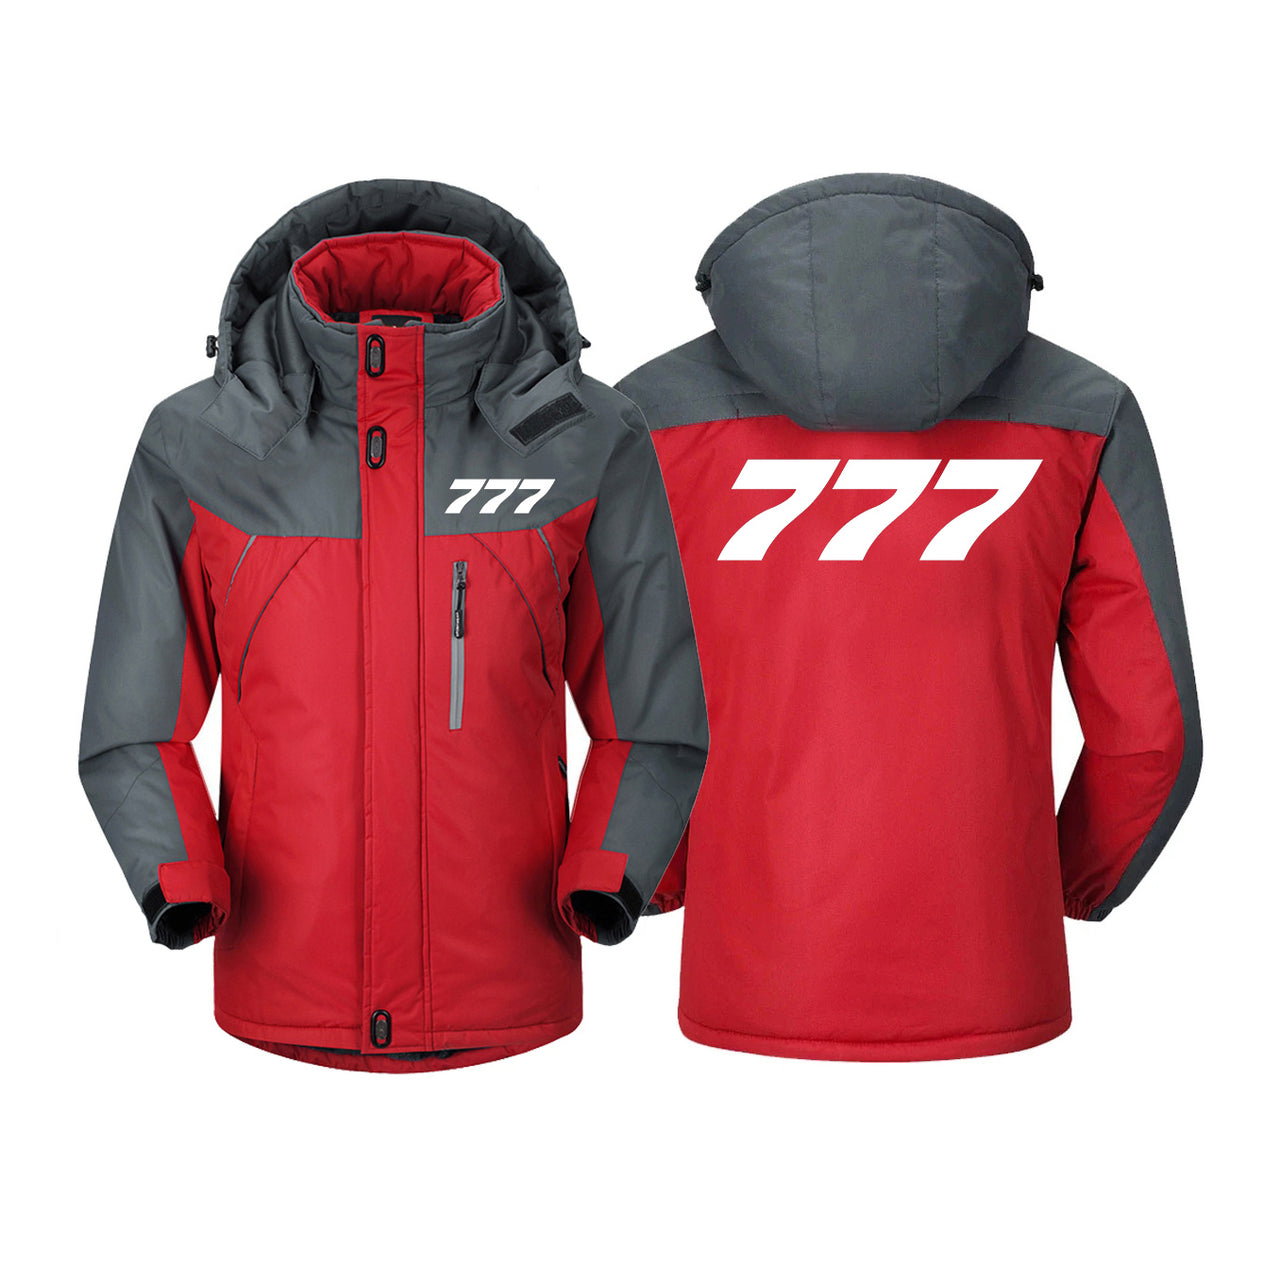 777 Flat Text Designed Thick Winter Jackets